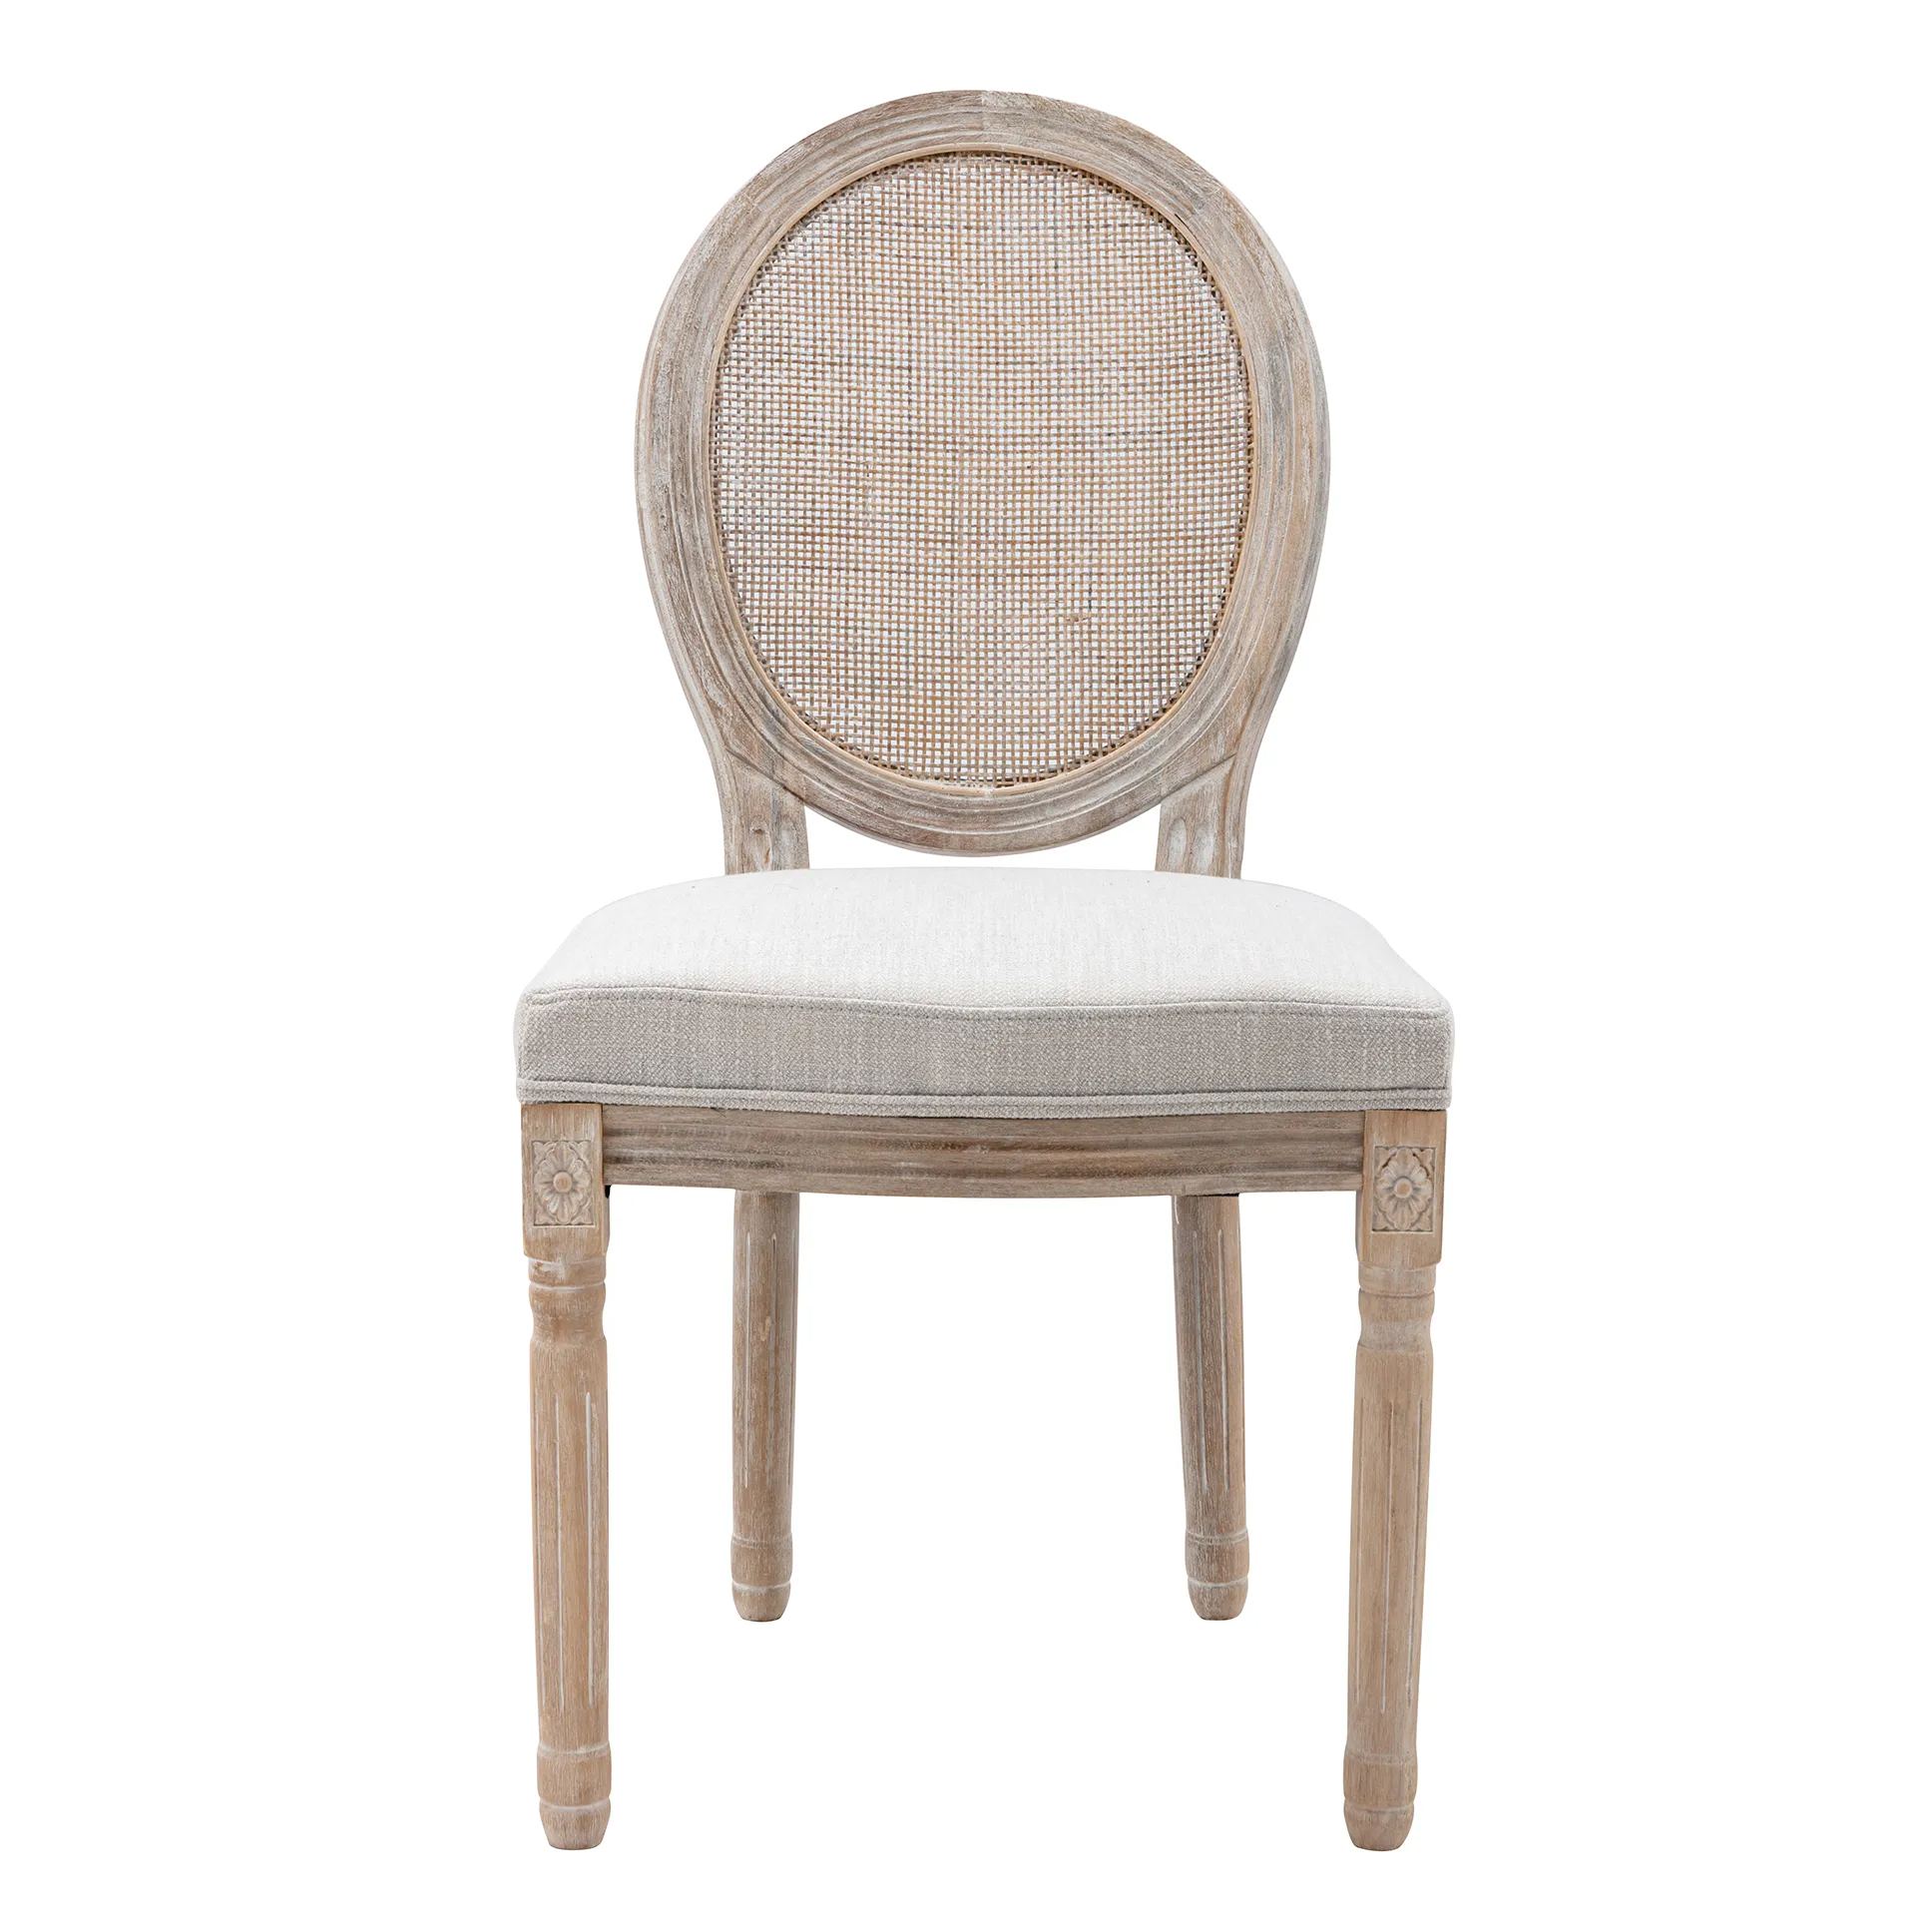 Round Cane Dining Chairs (Set of 2)